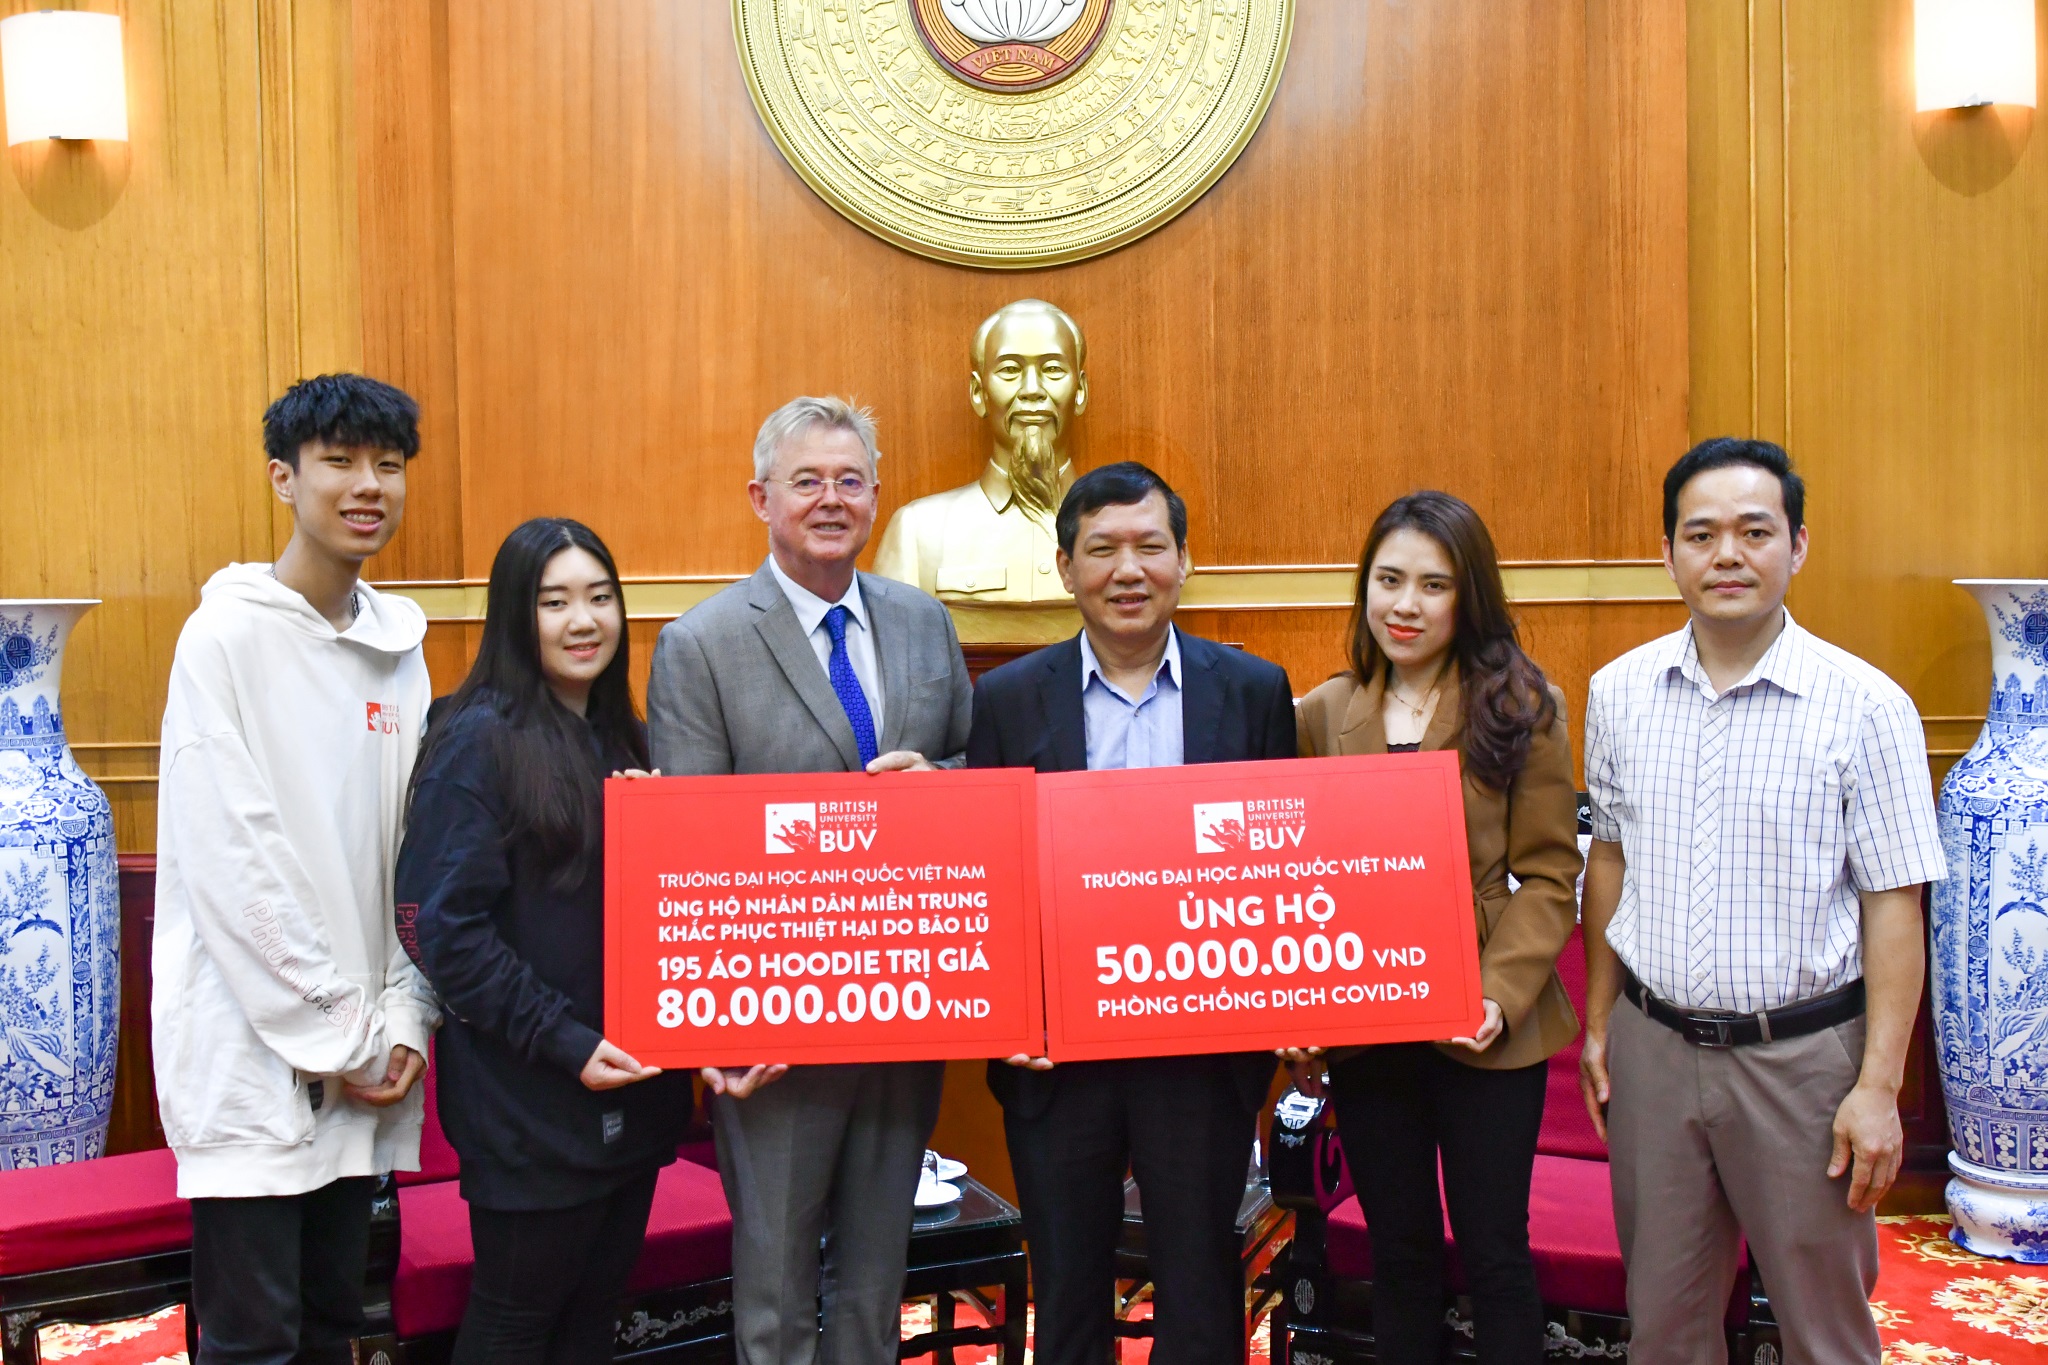 BUV donates 50 million VND and 195 hoodies to the Central Committee of the Vietnamese Fatherland Front, supporting the “Covid-19 Disease Prevention Fund” and Central Vietnam